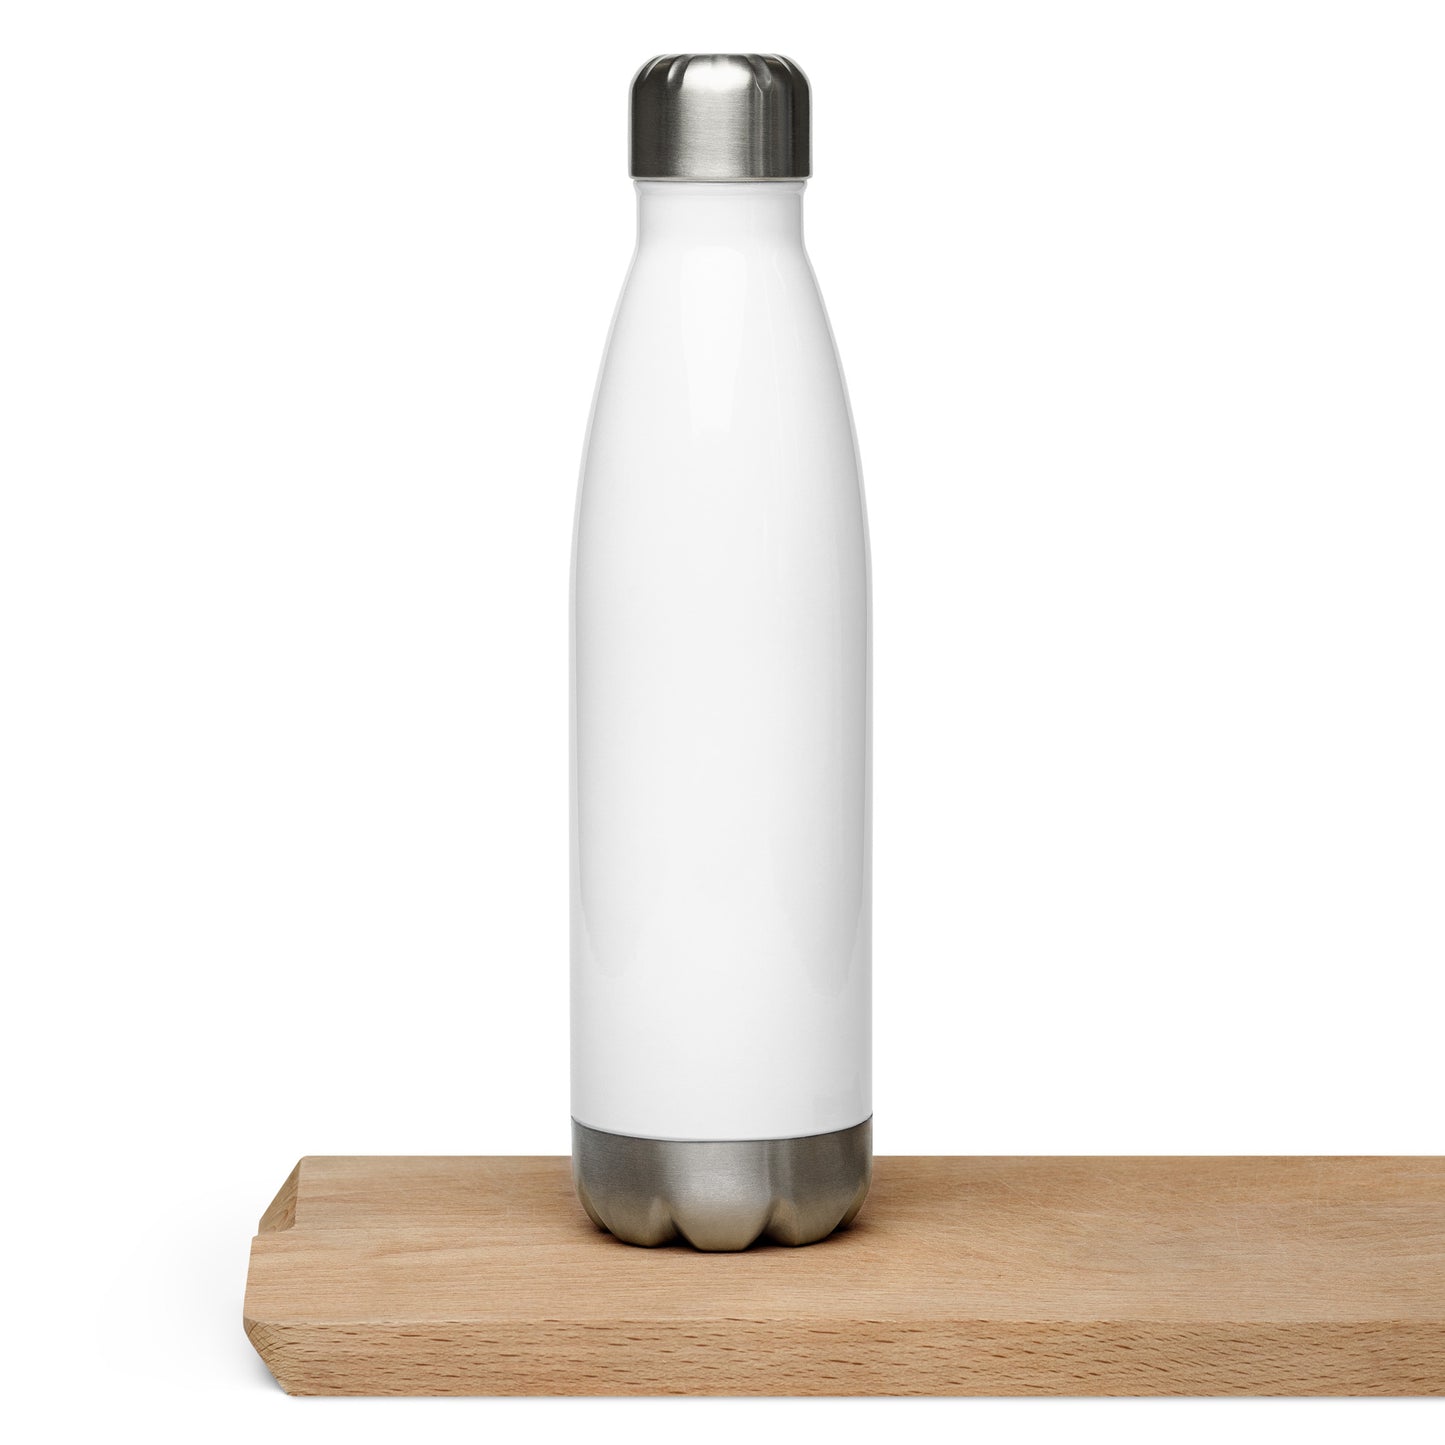 iFly Ag Stainless Steel Water Bottle